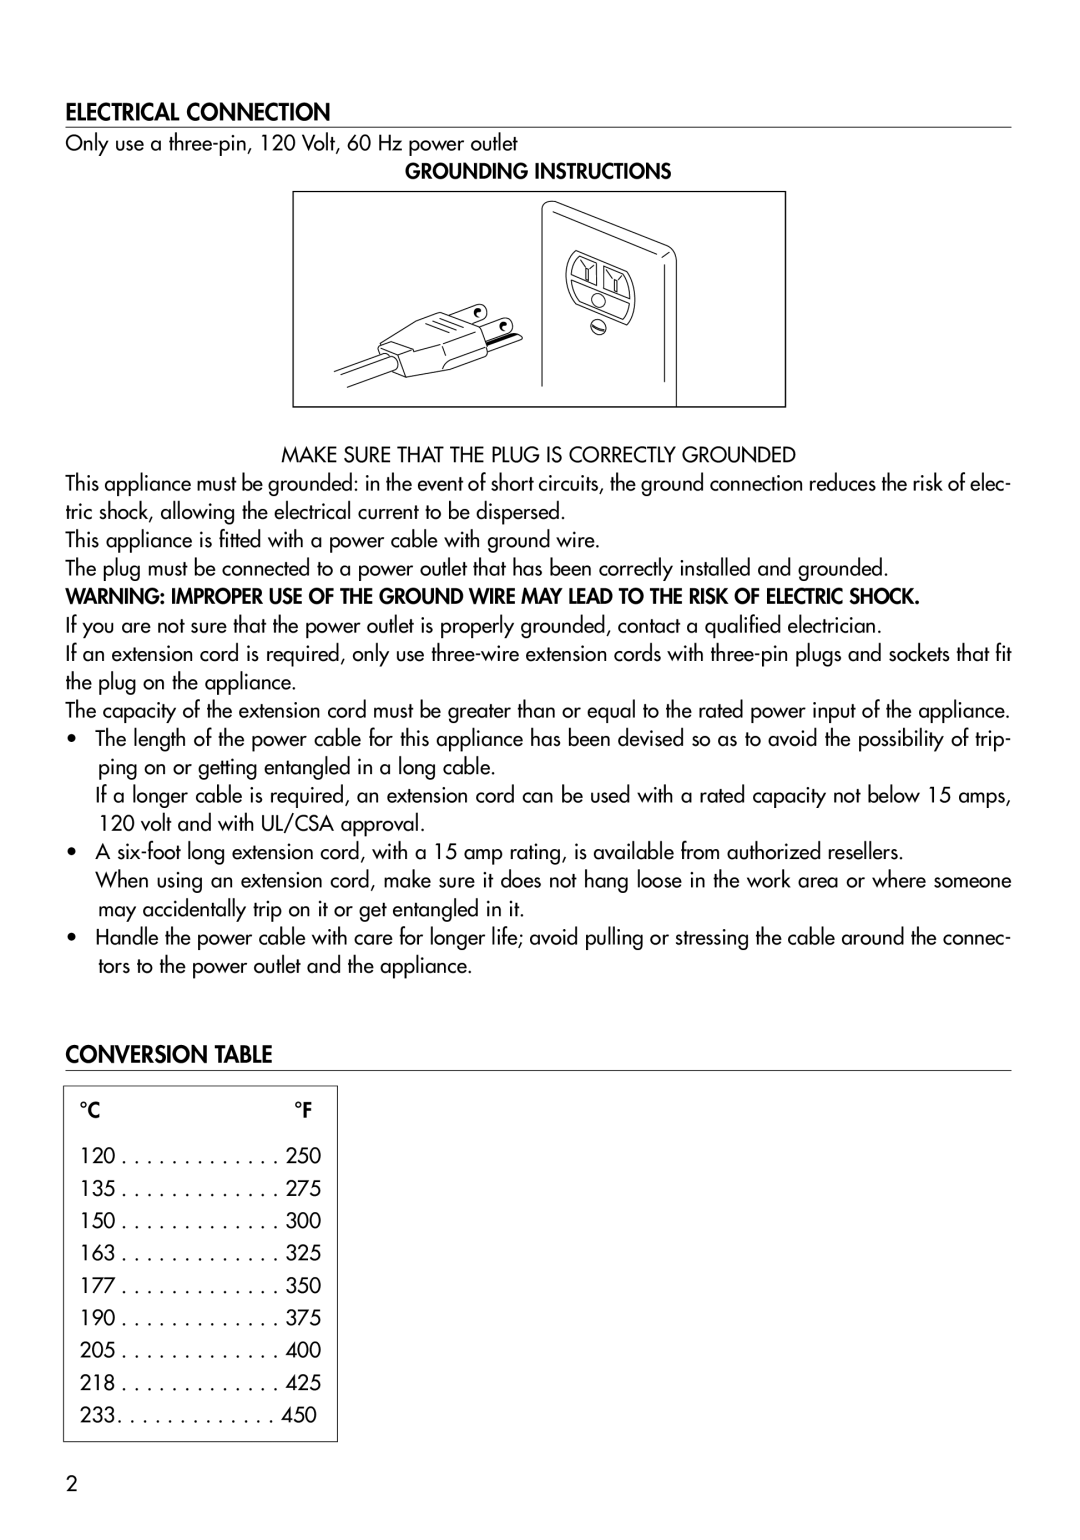 DeLonghi EO420 manual Electrical Connection, Conversion Table 